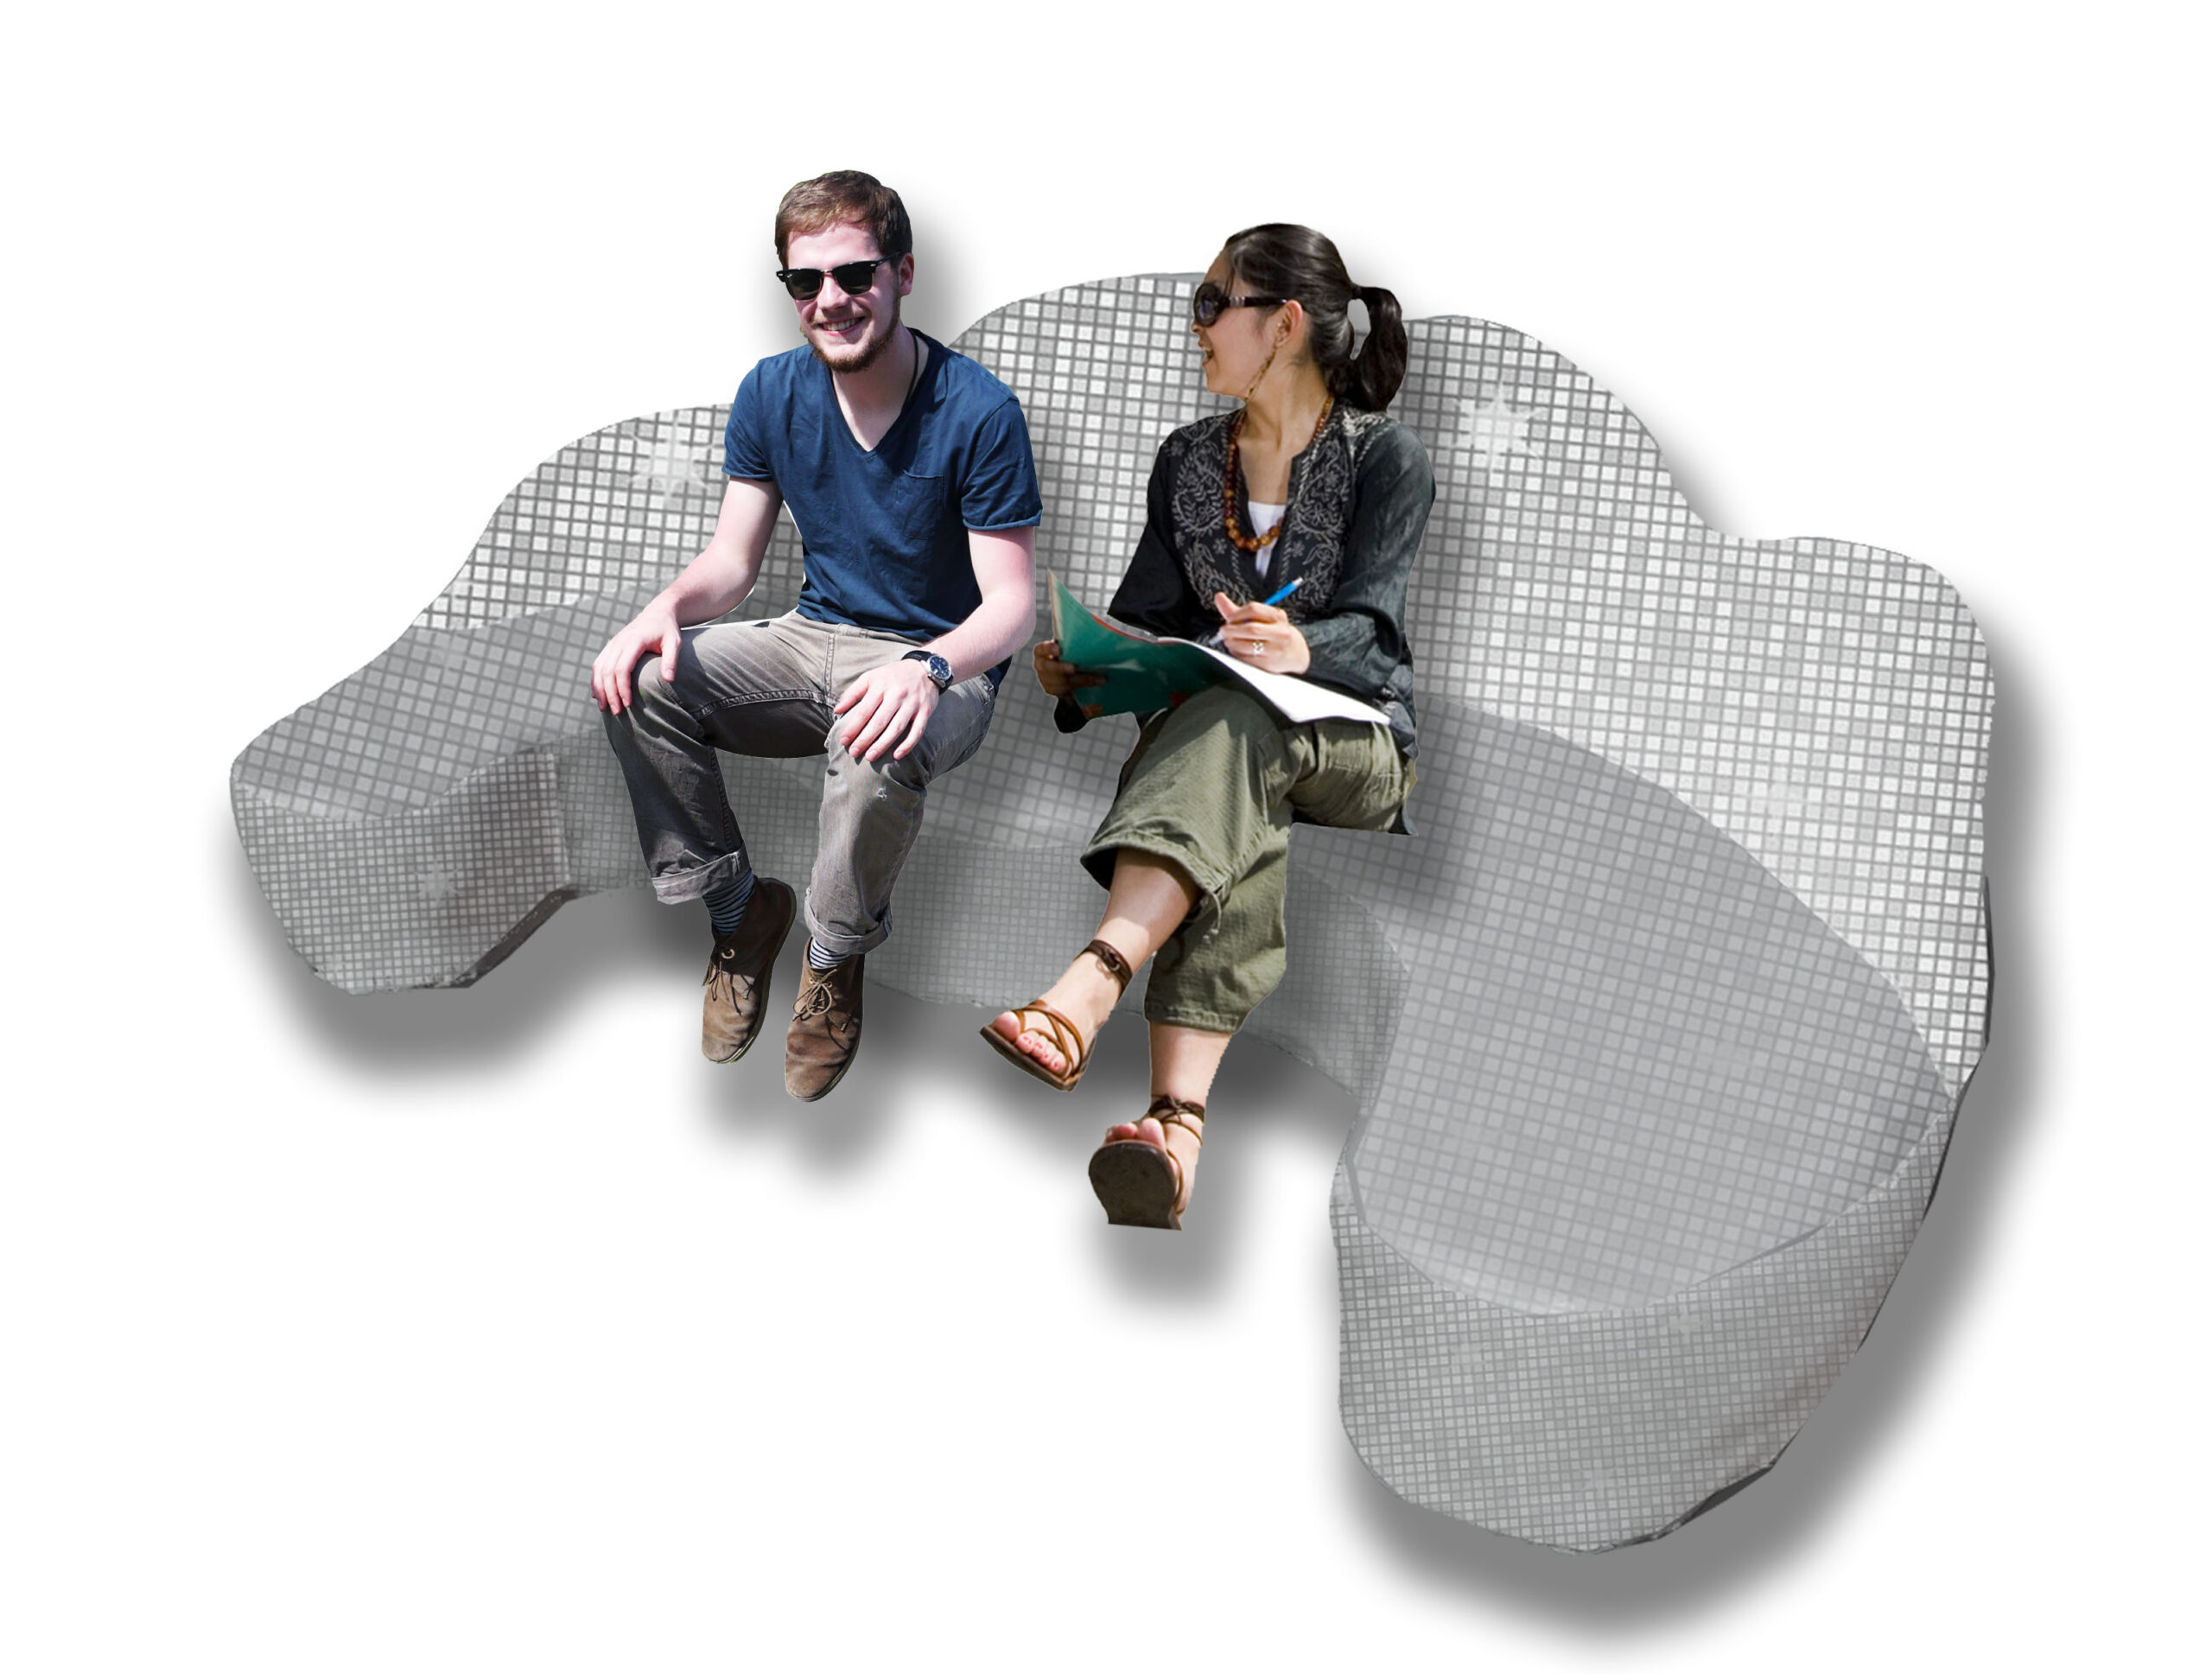 This reflective interactive sound bench will be part of the art installation being unveiled on July 27th at Hodag Park.
Design Mock Up Credit: Witt Siasoco